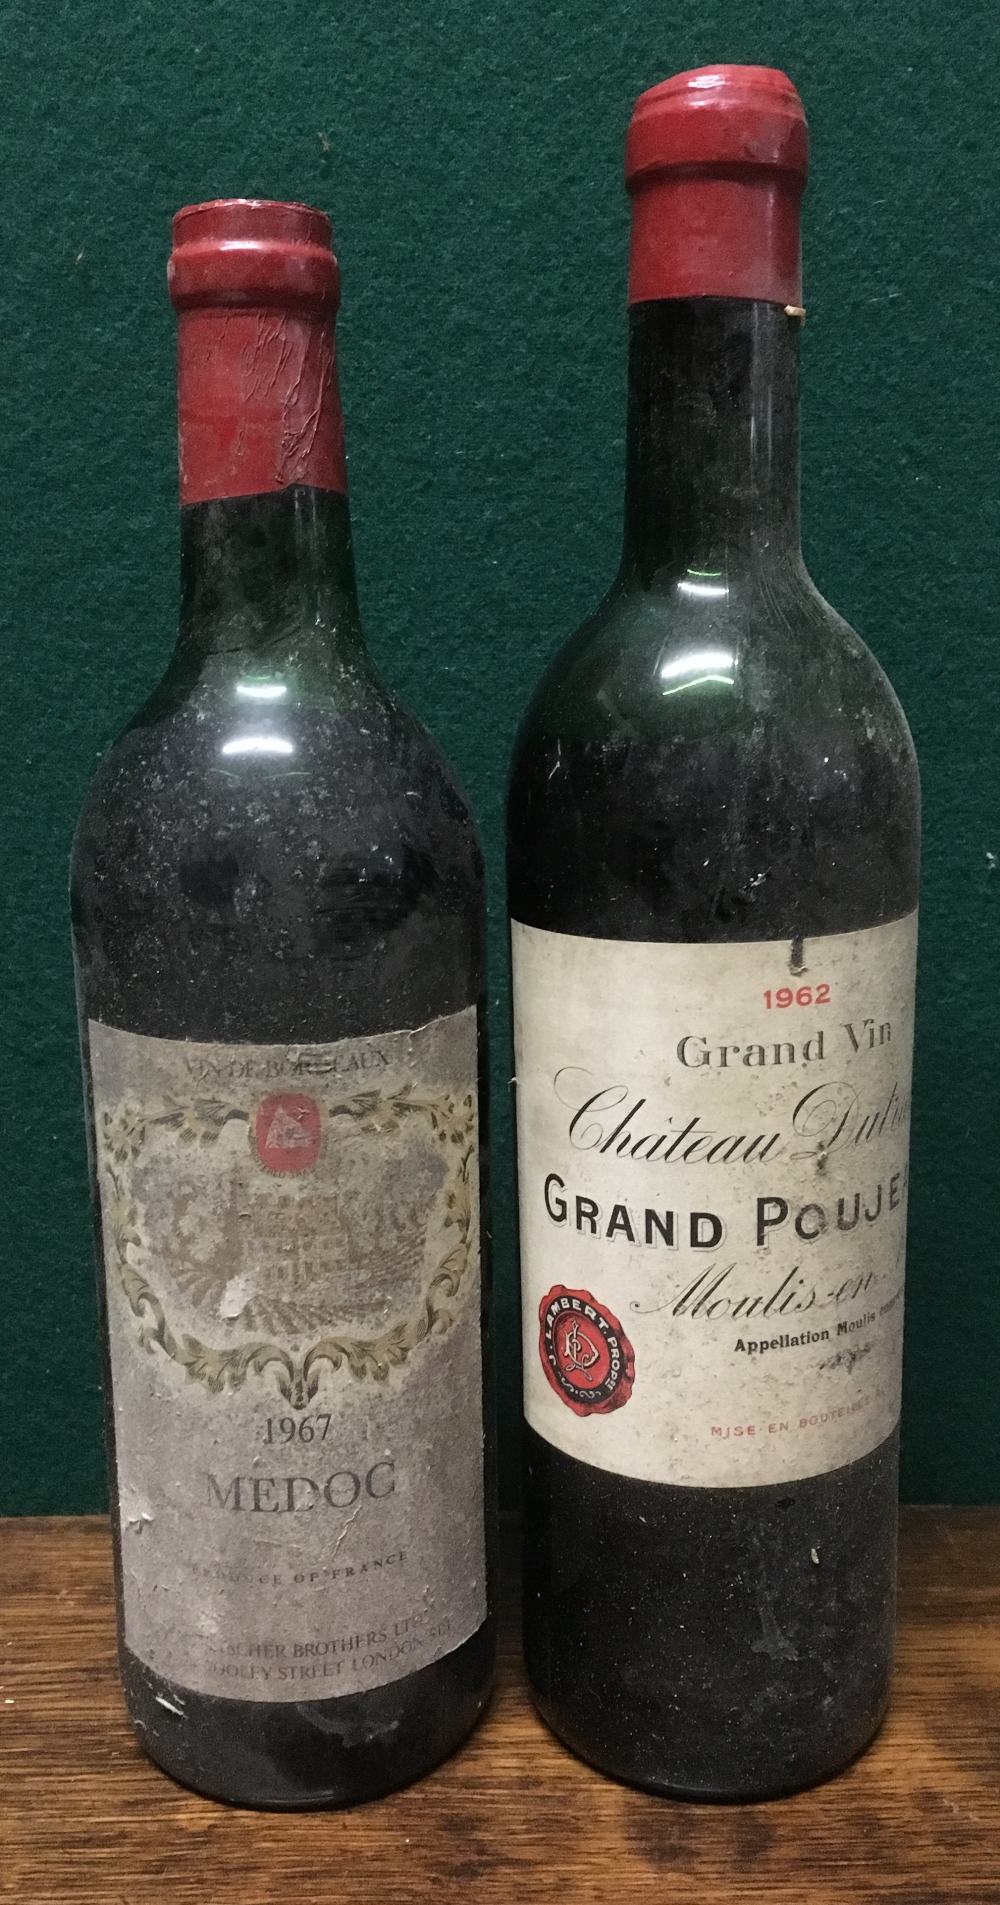 Chateau Dutruch Grand Poujeaux 1962 Single bottle; together with Medoc 1967, single bottle.